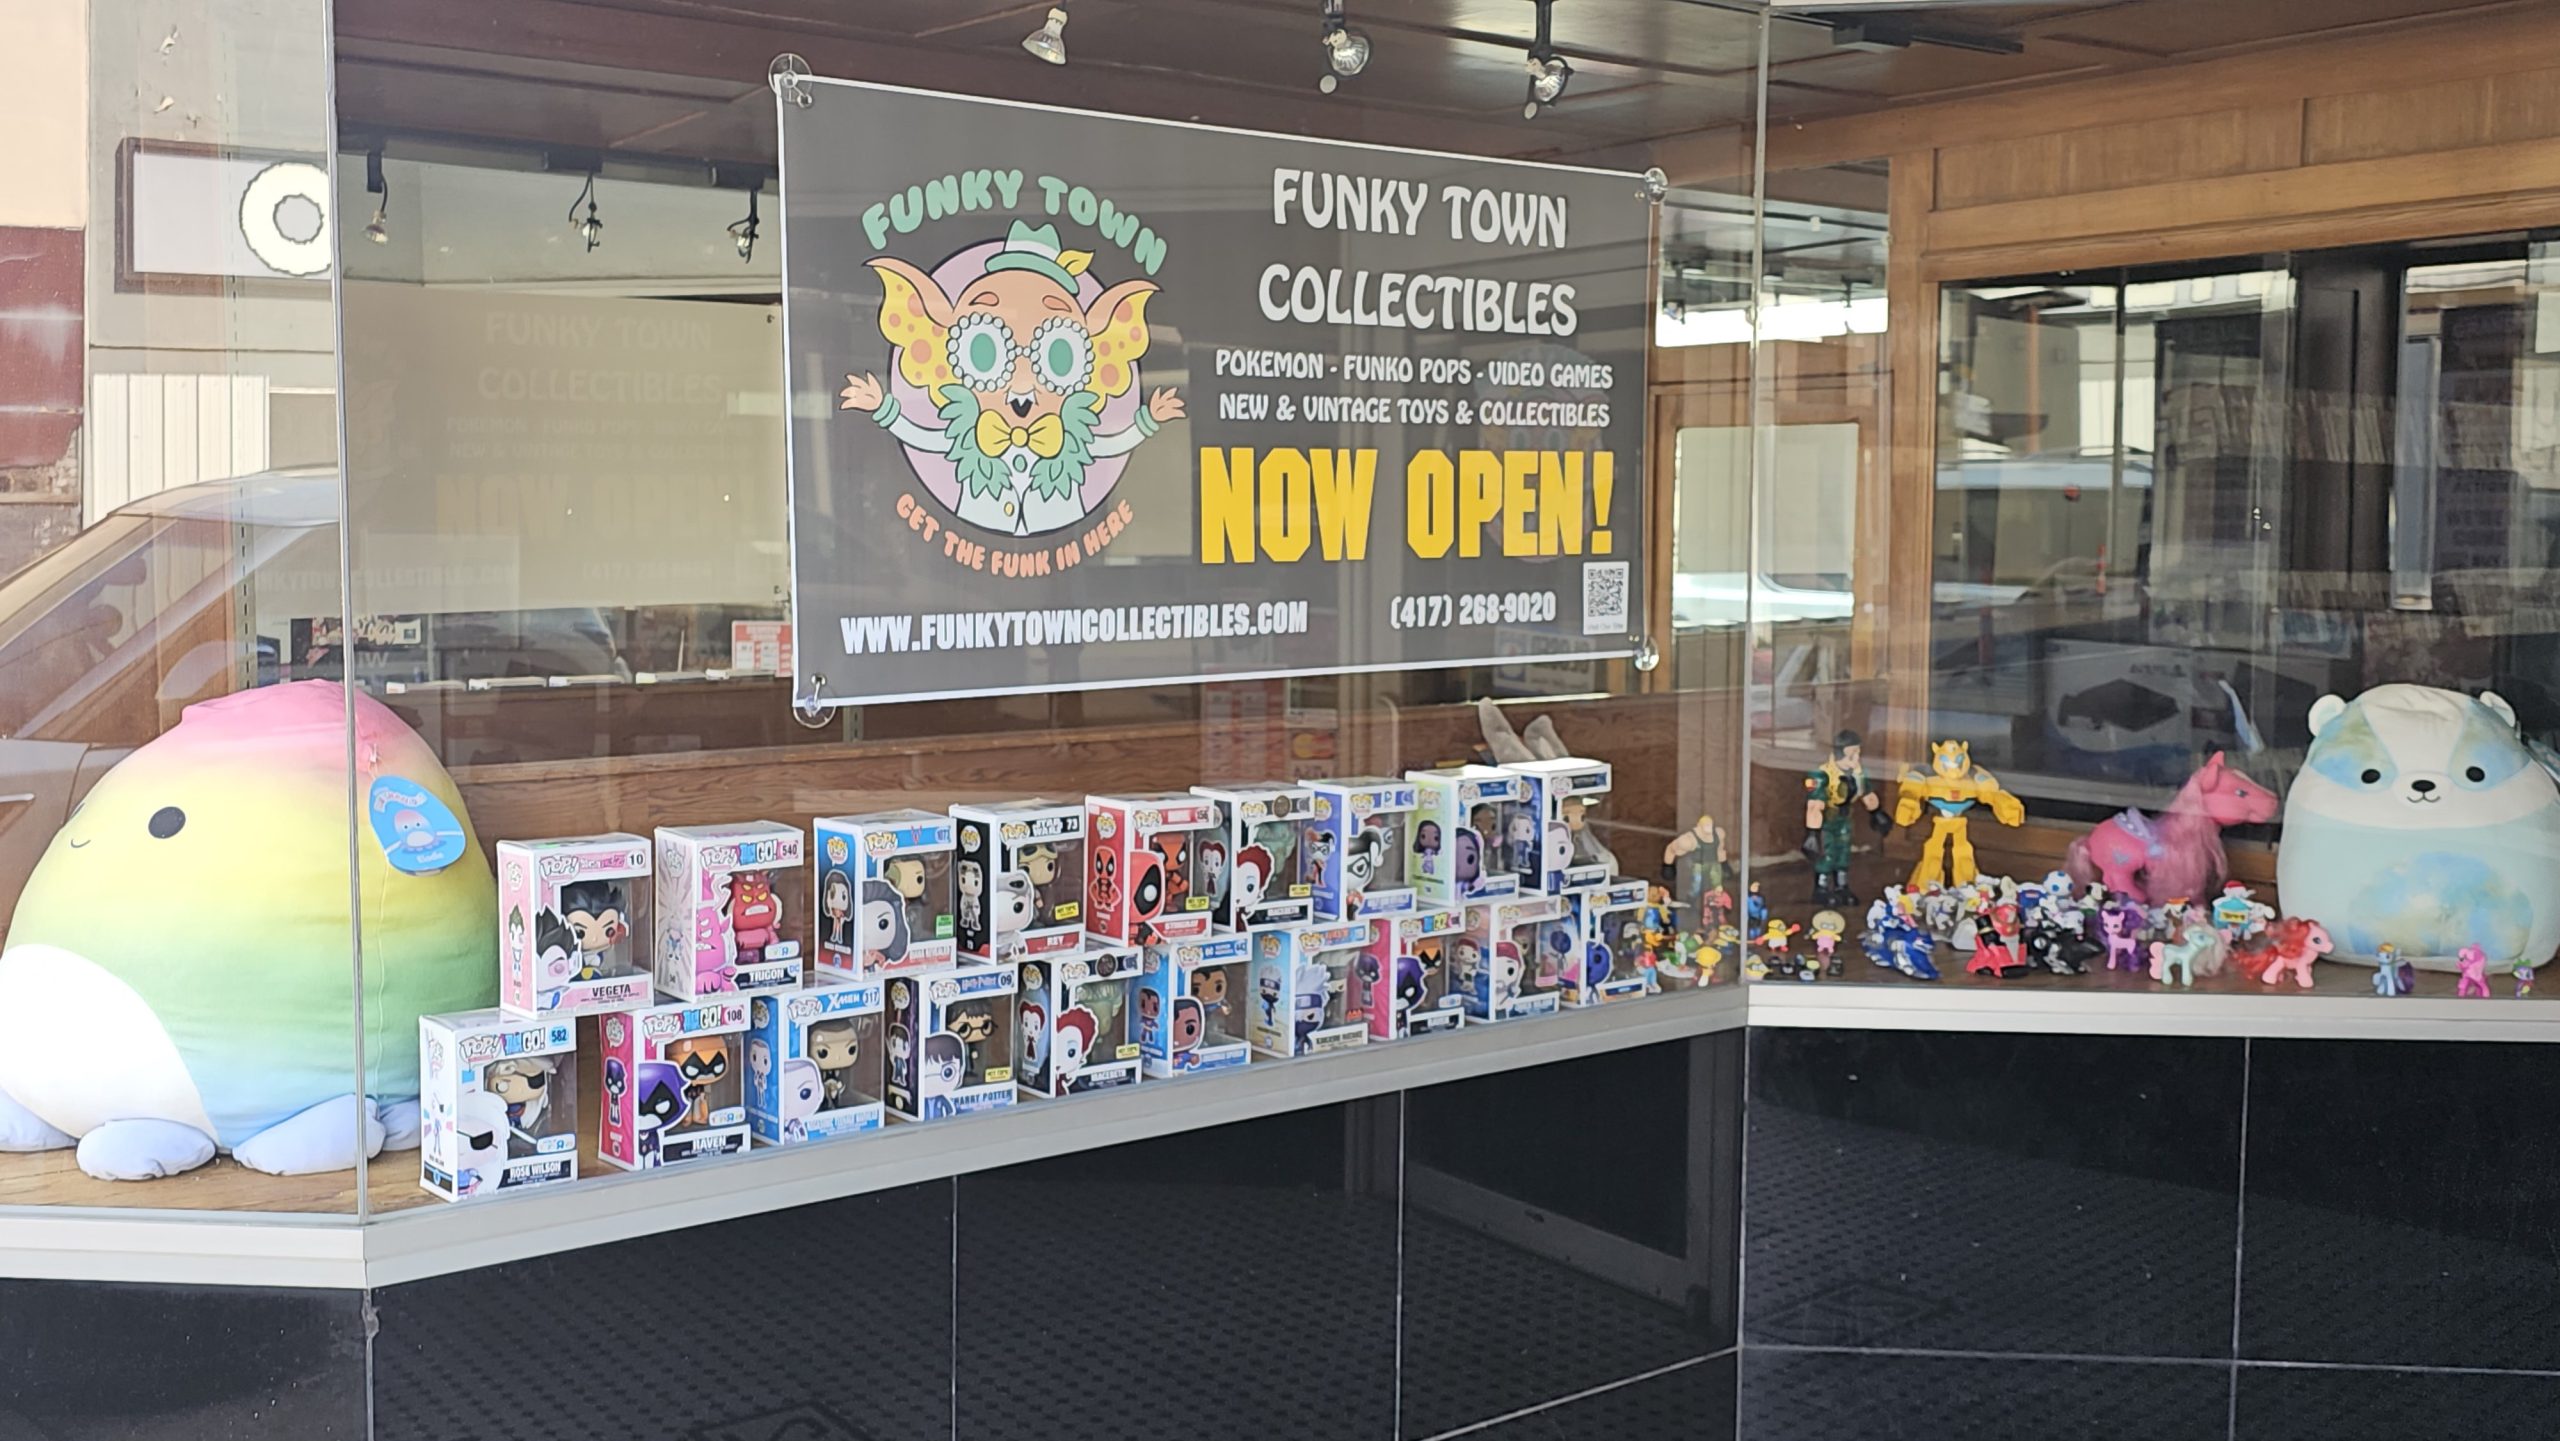 Pop-culture store Funky Town, based in New York, adds location in downtown Springfield